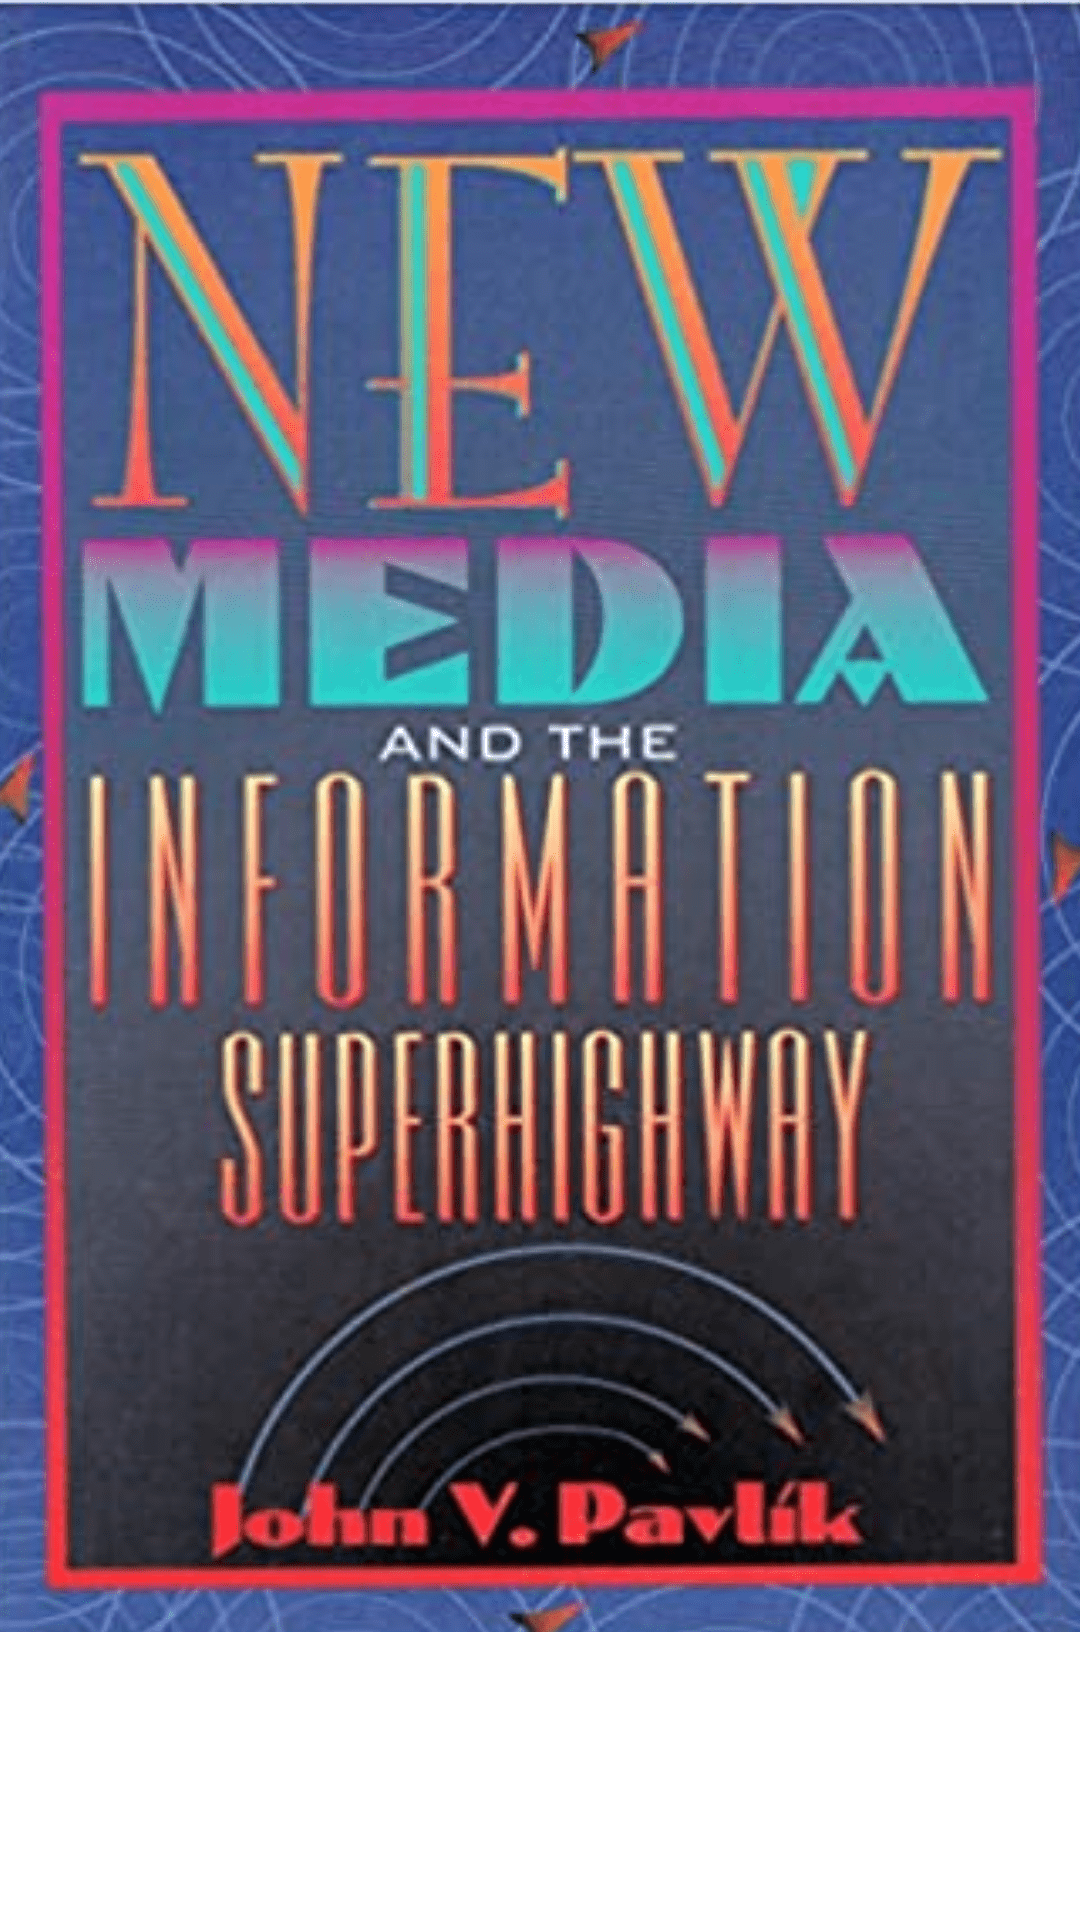 New Media and the Information Superhighway